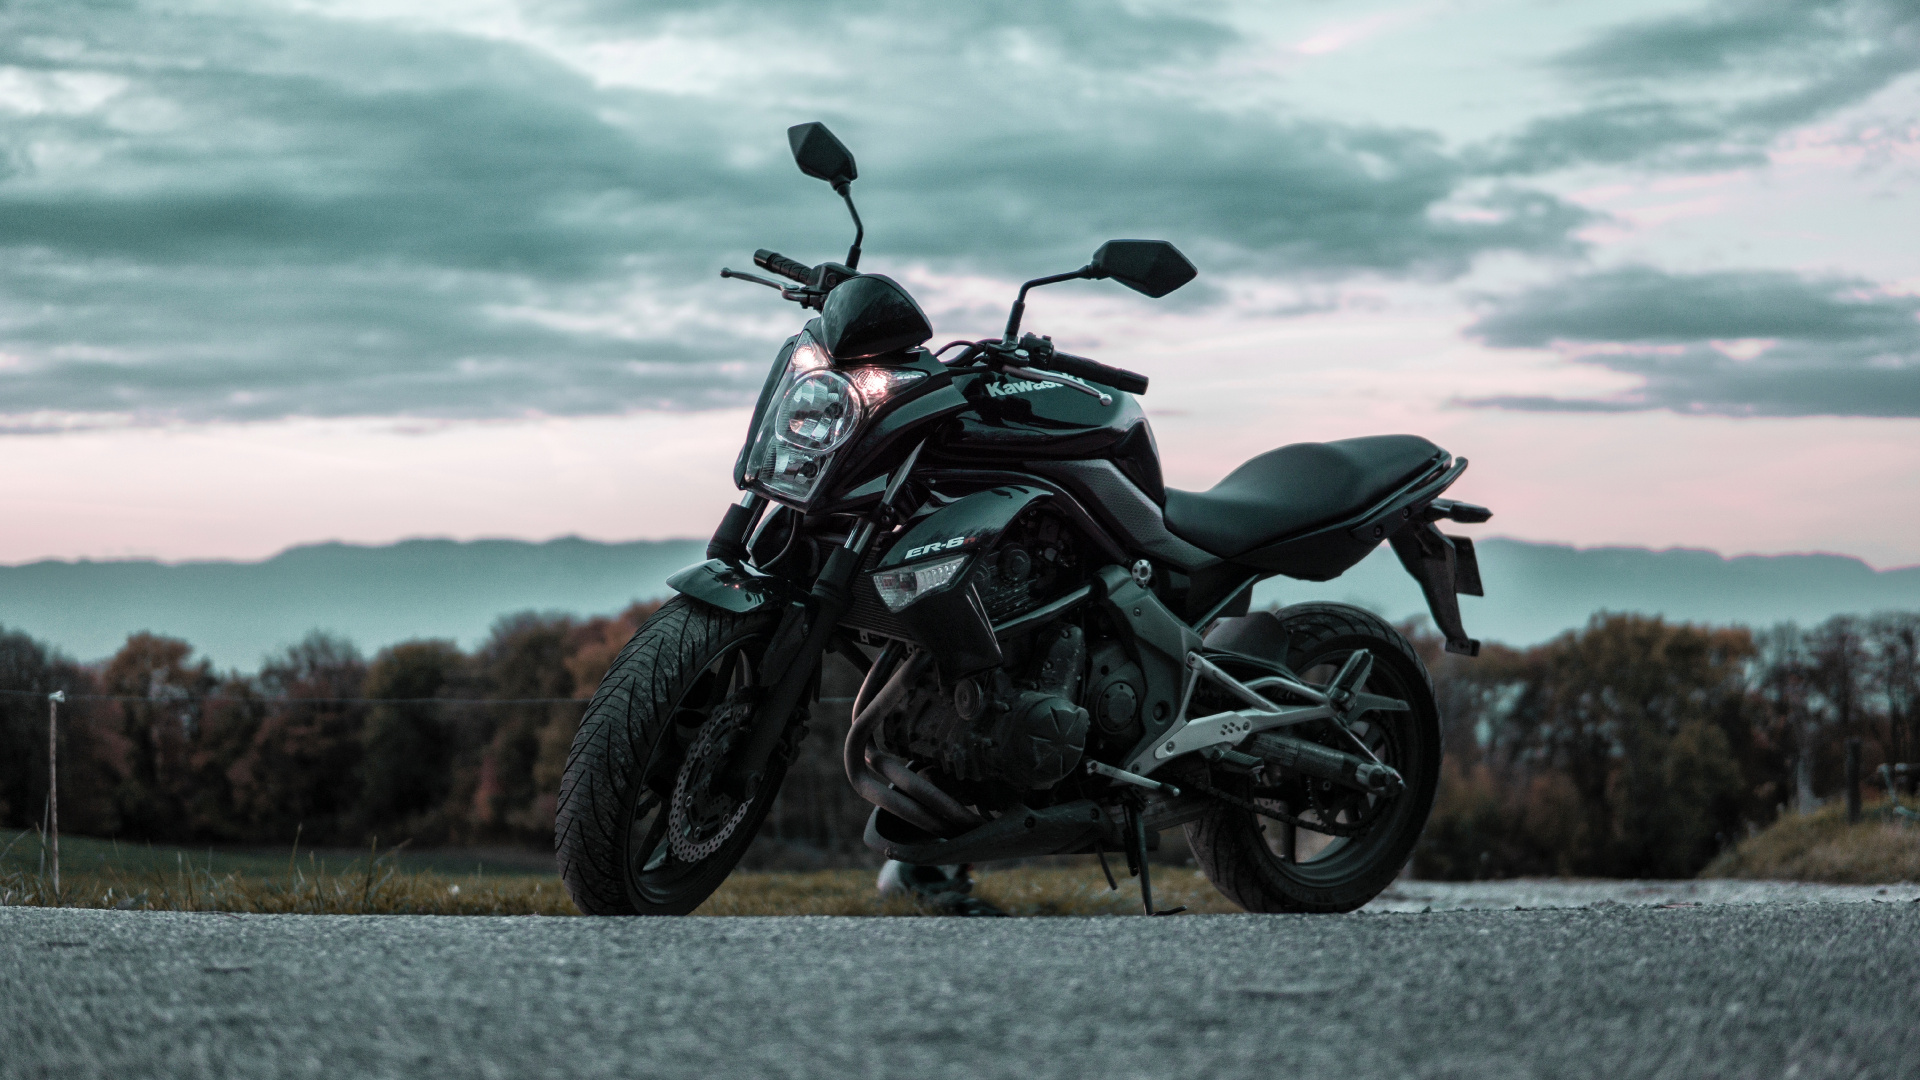 Black and Gray Motorcycle on Gray Asphalt Road During Daytime. Wallpaper in 1920x1080 Resolution